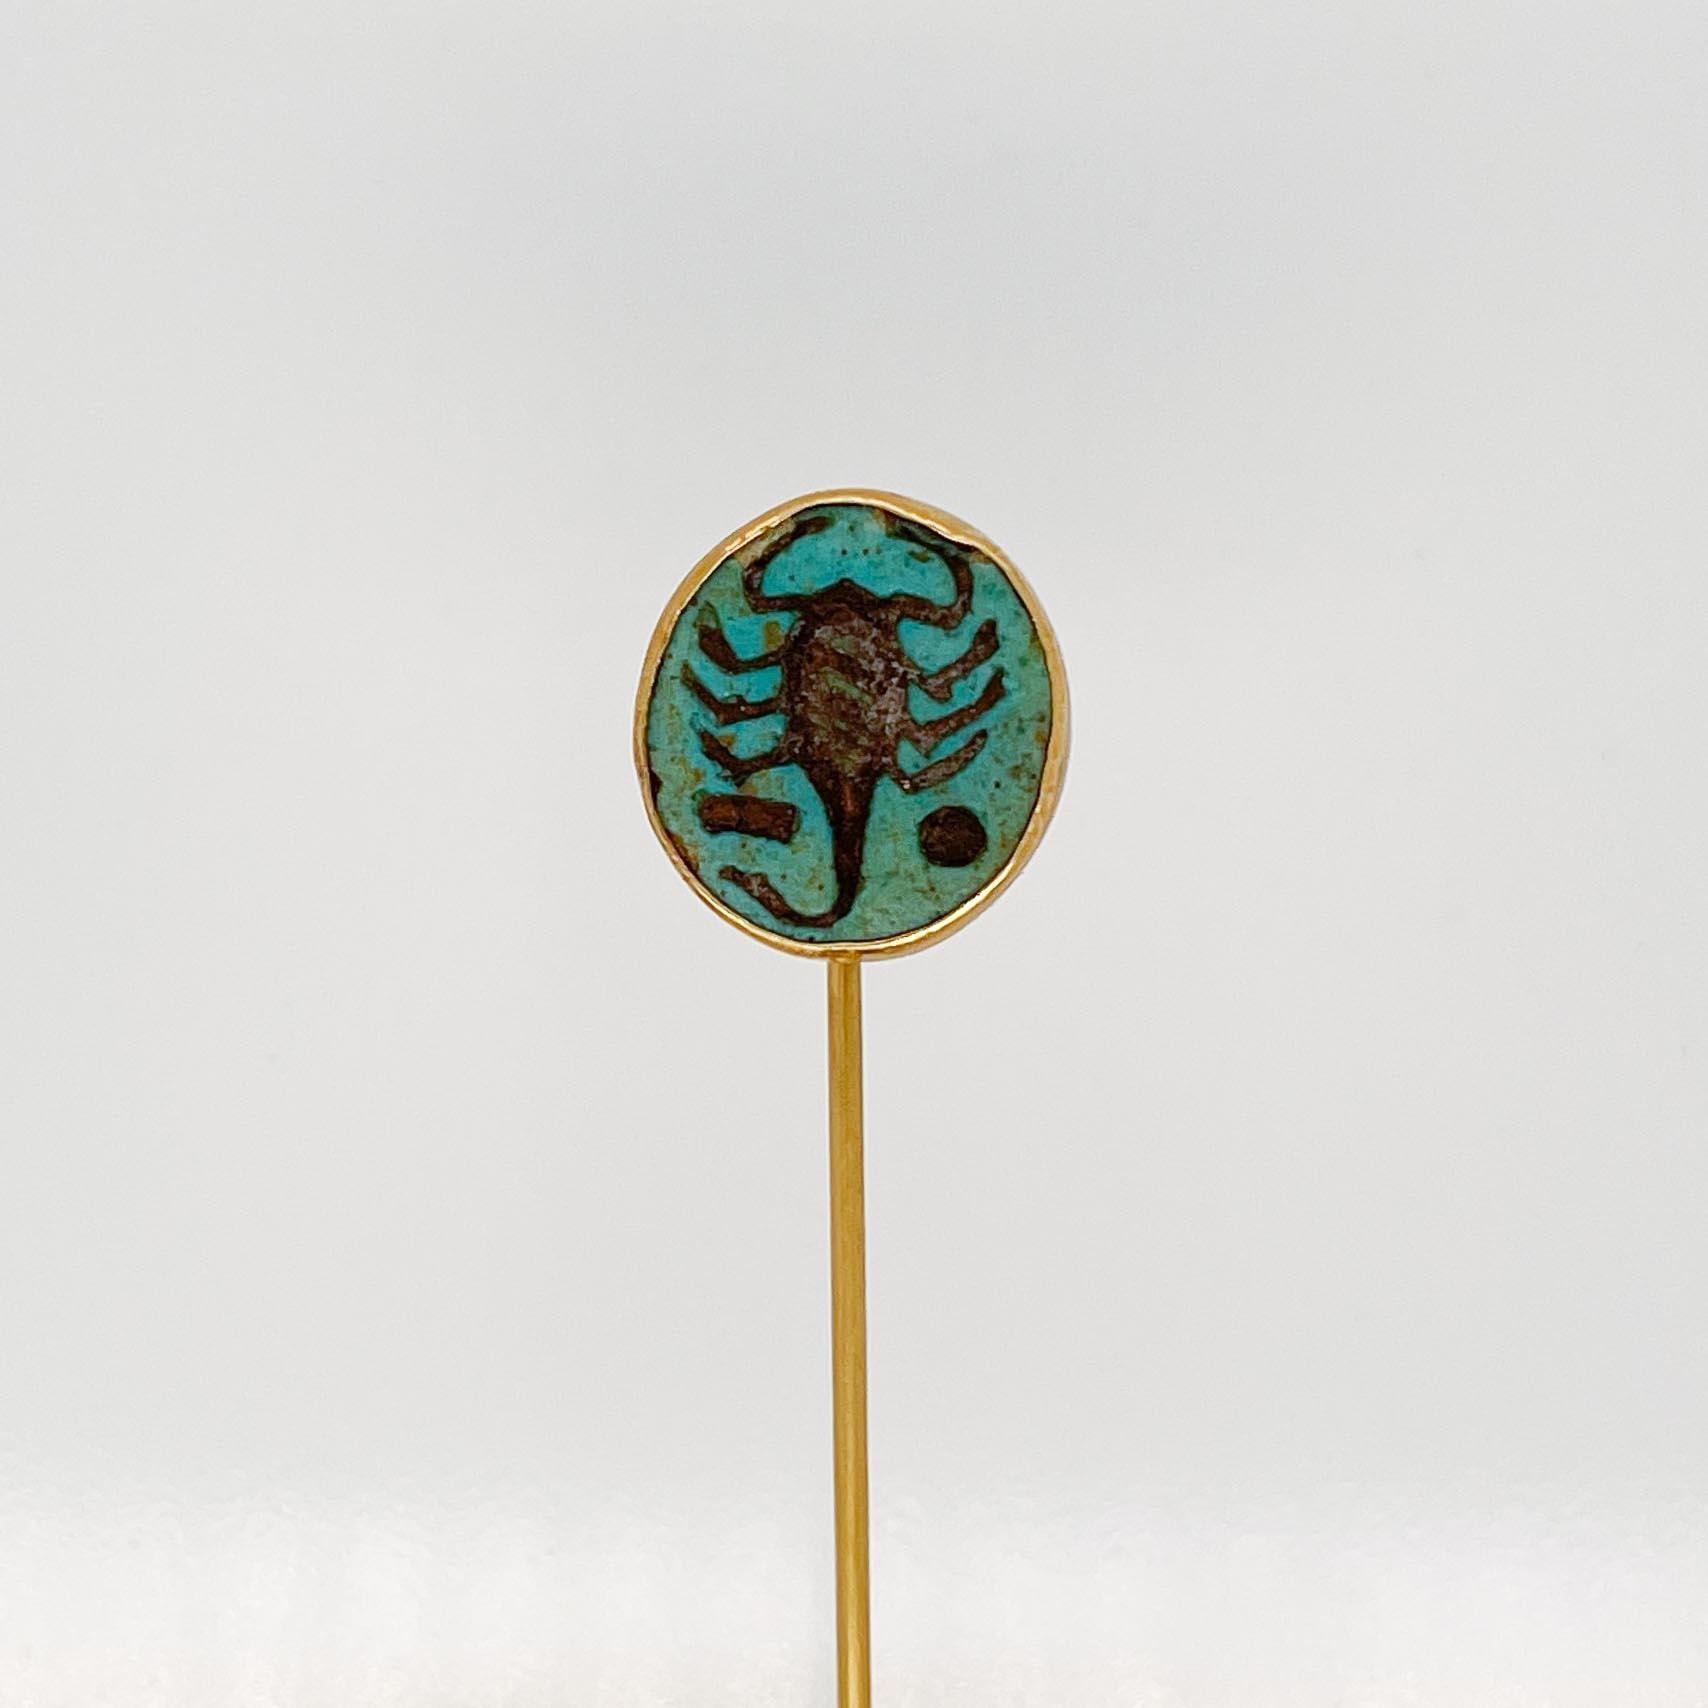 A fine Art Nouveau period or Egyptian Revival stick pin.

In 14 karat yellow gold.

Set with an Egyptian Faience cabochon with the image of a scorpion. (Possibly an ancient Egyptian scarab.)

Simply a wonderful Revival piece! 

Date:
ca.